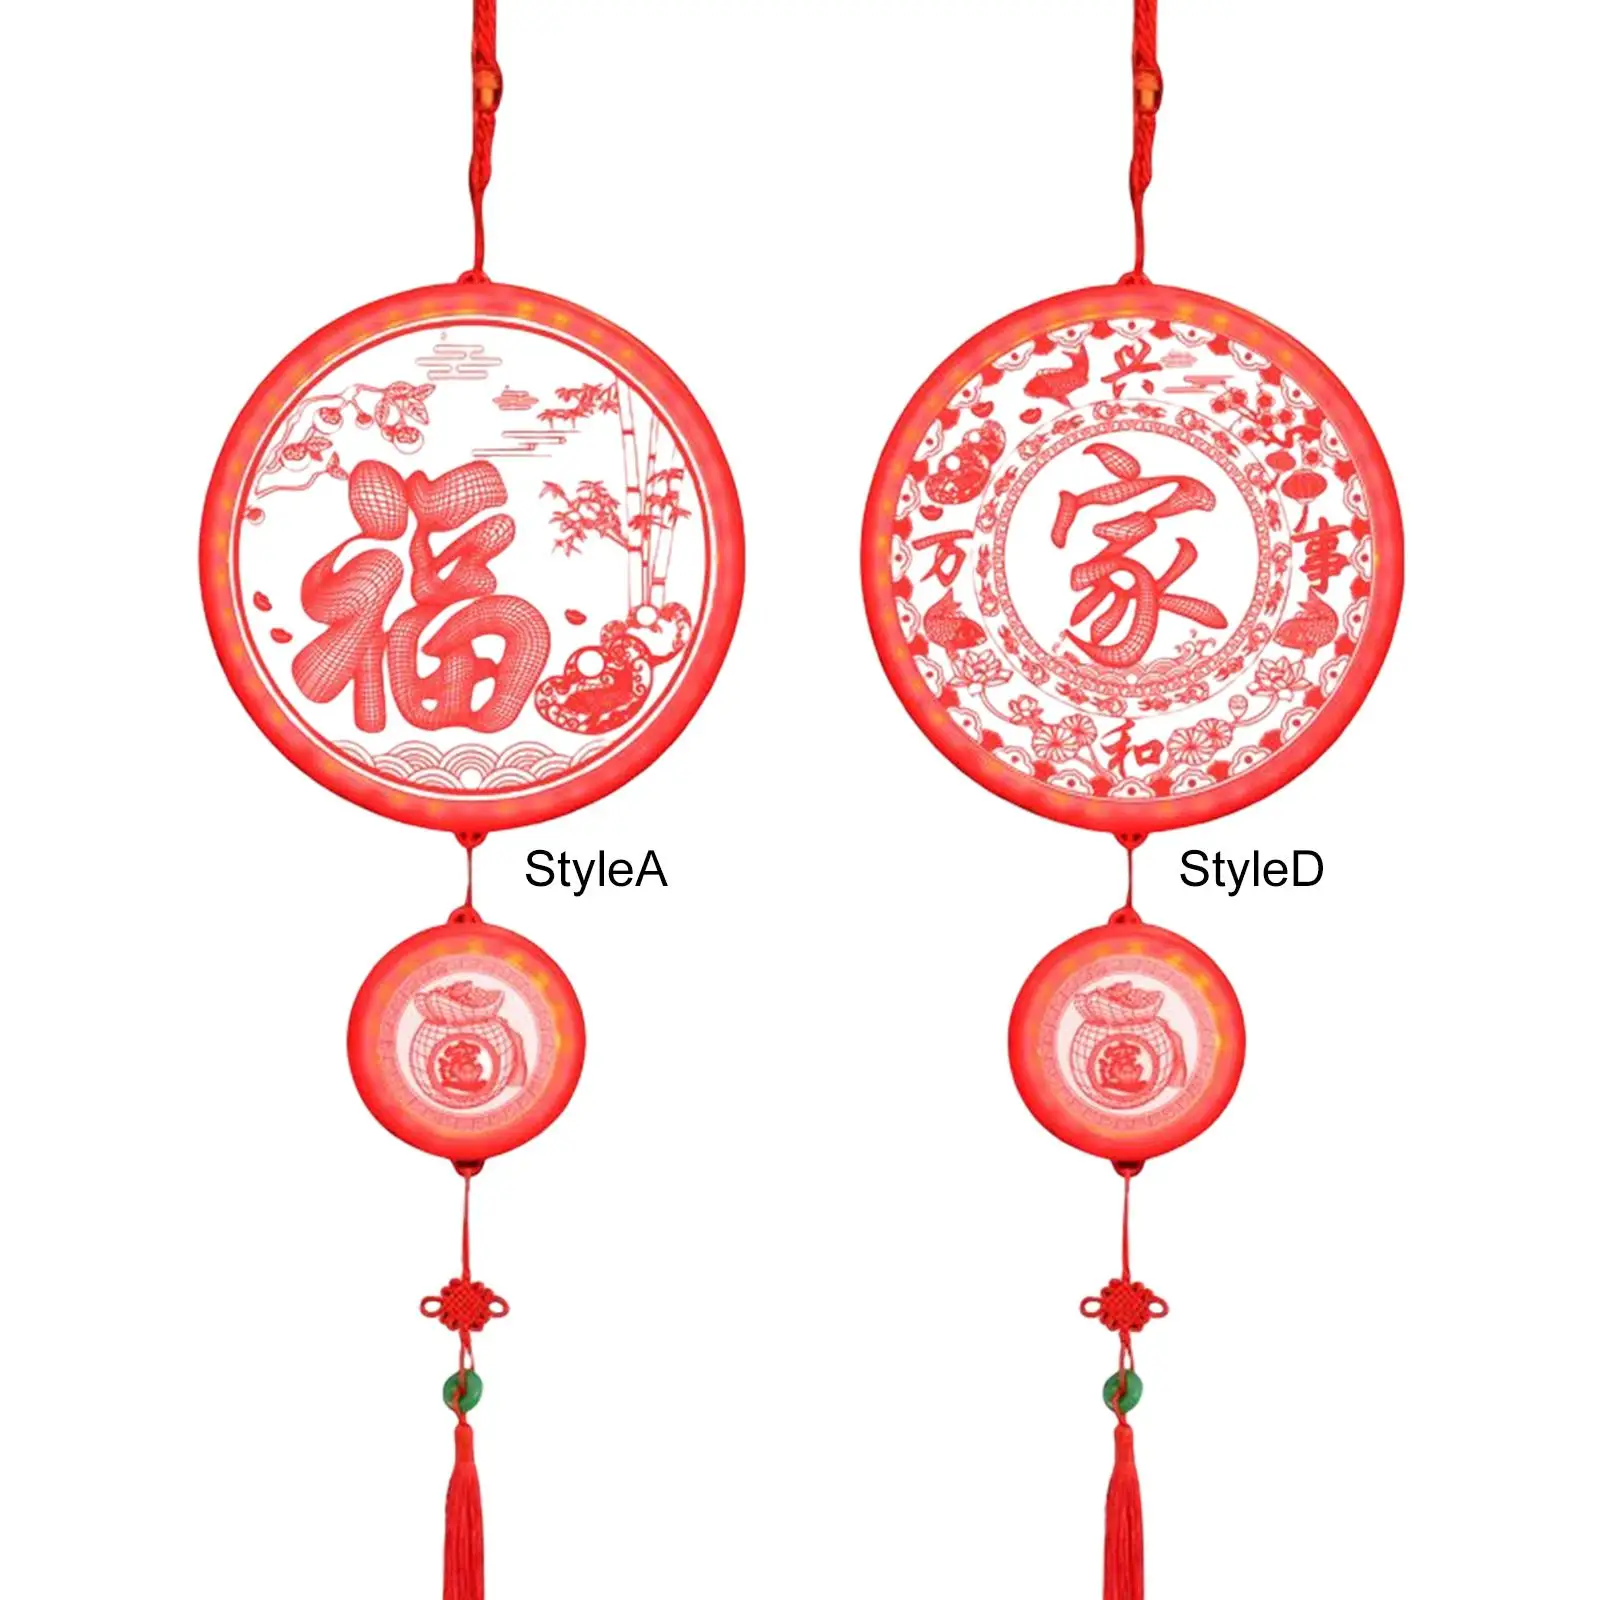 LED Lights Spring Festival Light New Year Decor Pendant Ornament Hanging 3D for Celebration Party Holiday Window Home